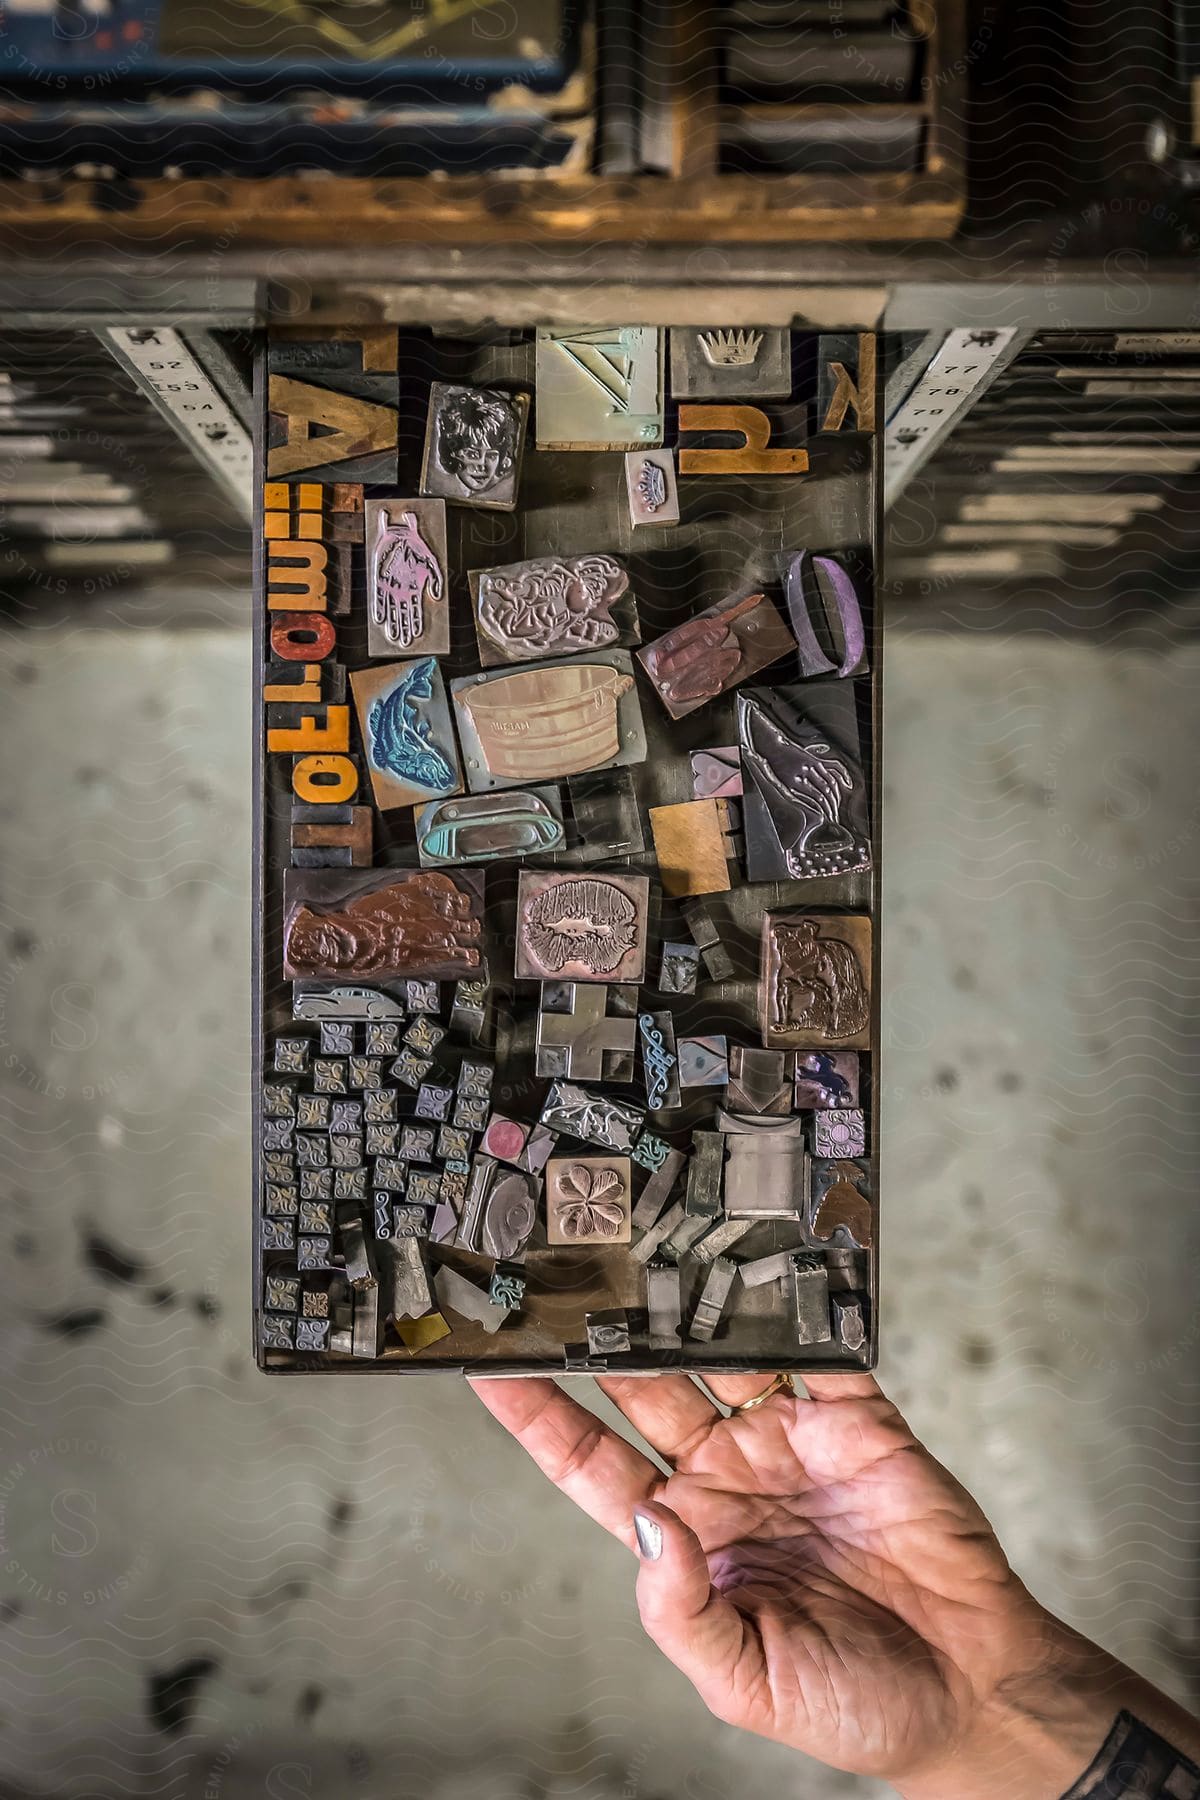 A hand with a tattooed wrist holds out a tray of stamps for a printing press